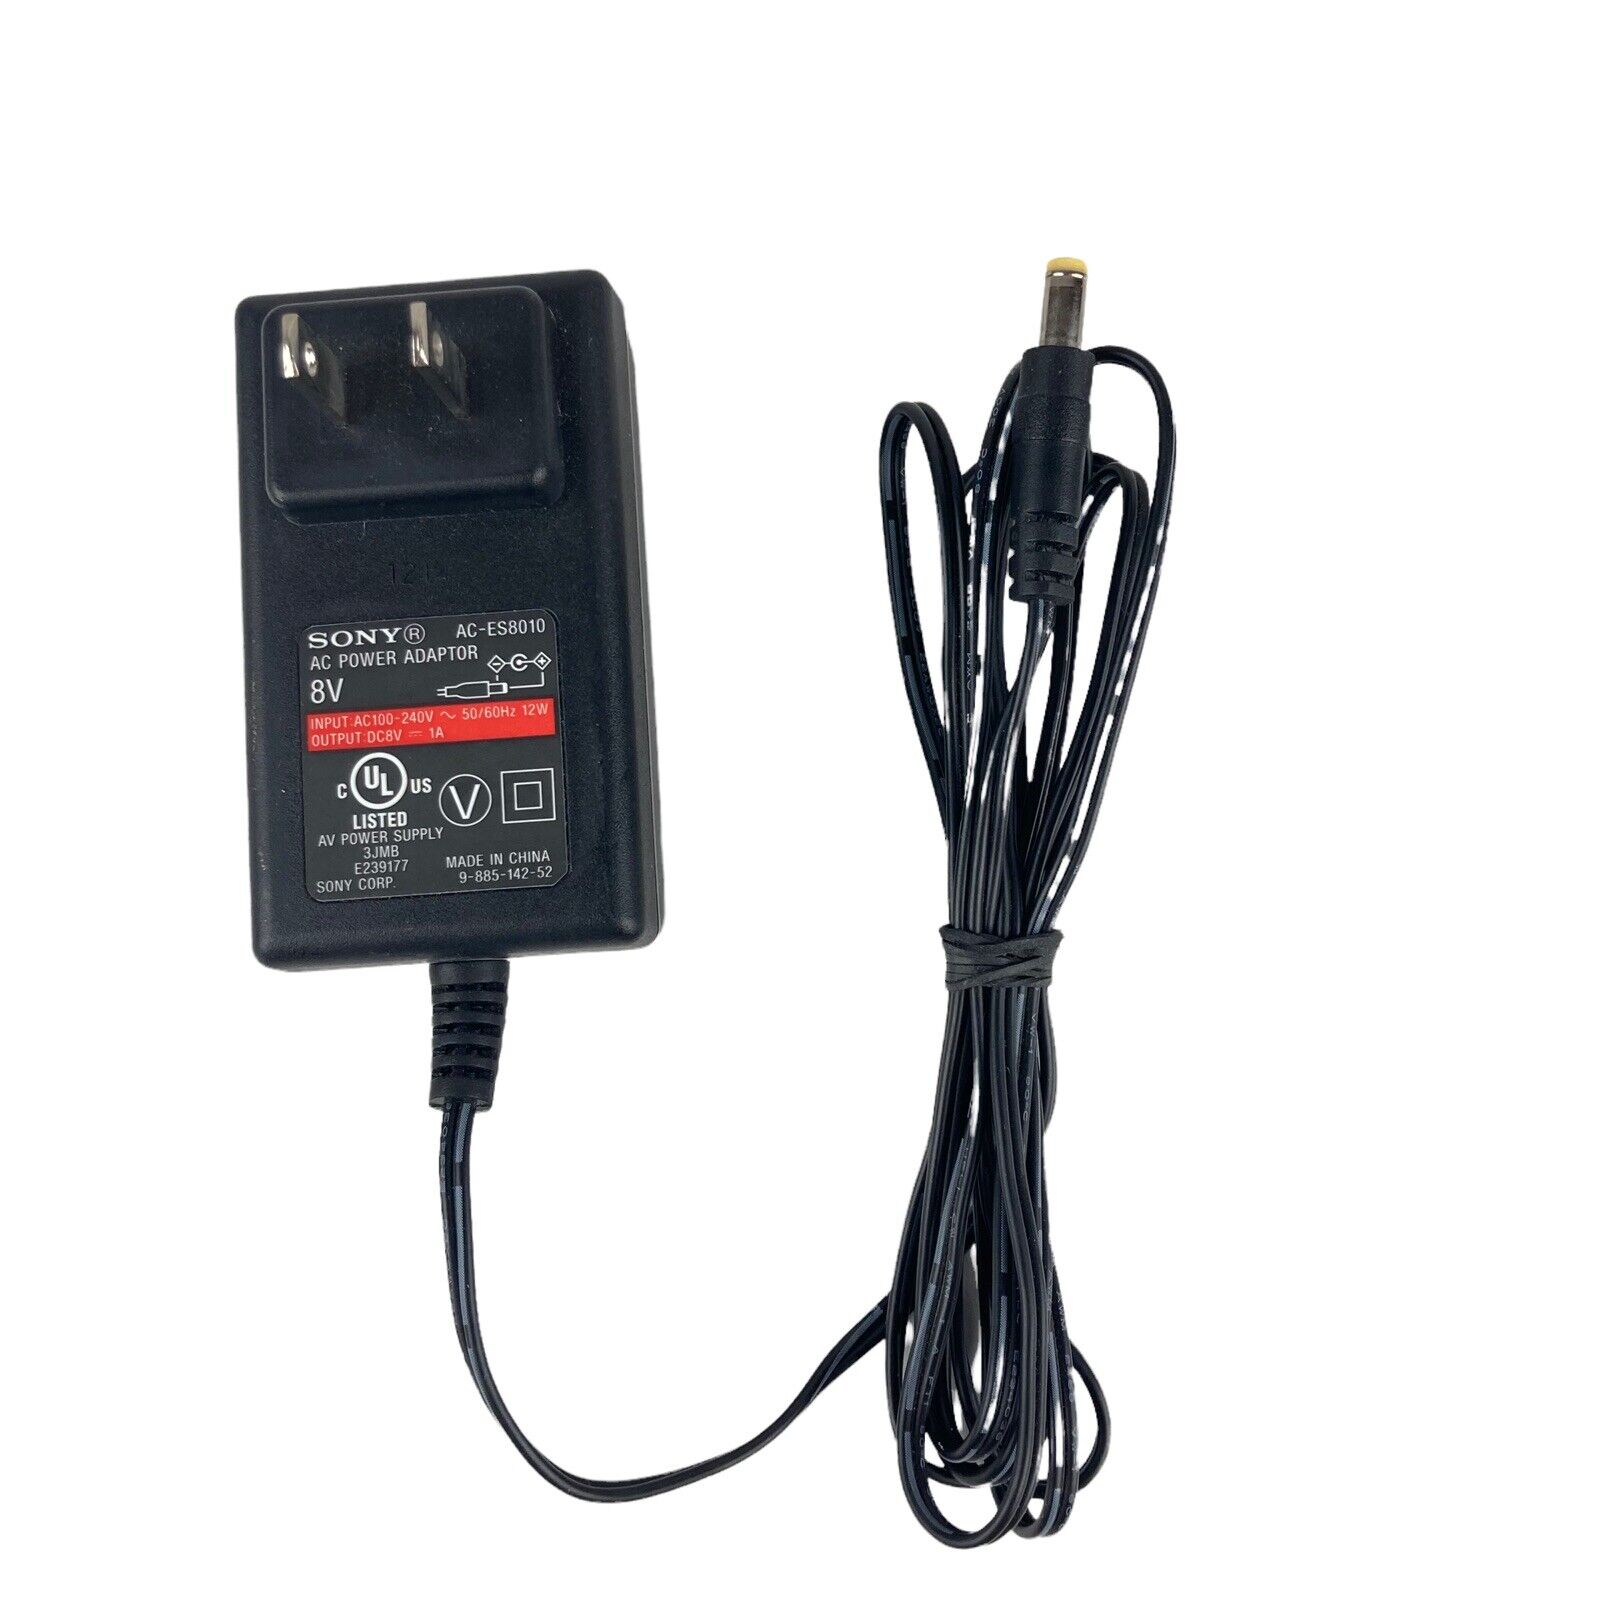 8V 1A Genuine Sony AC-ES8010 Power AC/DC Adapter charger For ICF-C05iP TESTED Country/Region of Manufacture: China Cu